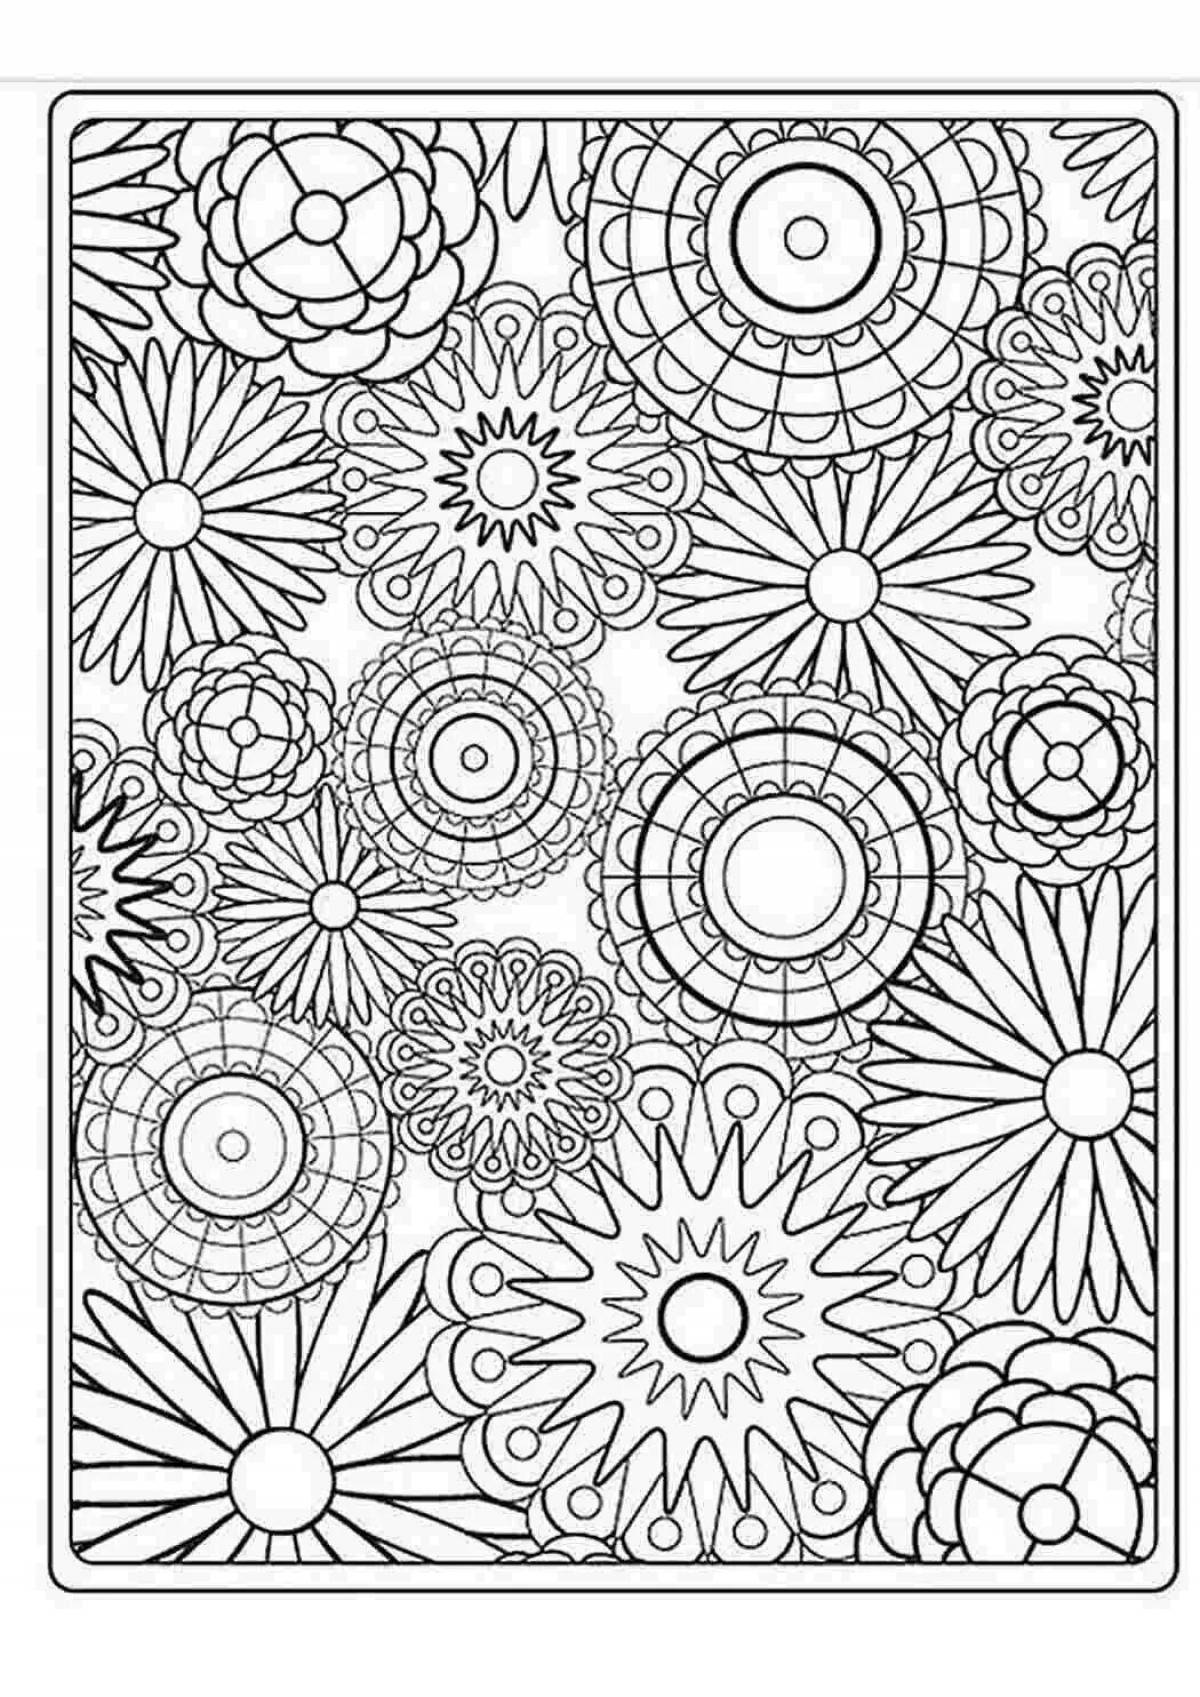 Abstract coloring patterns